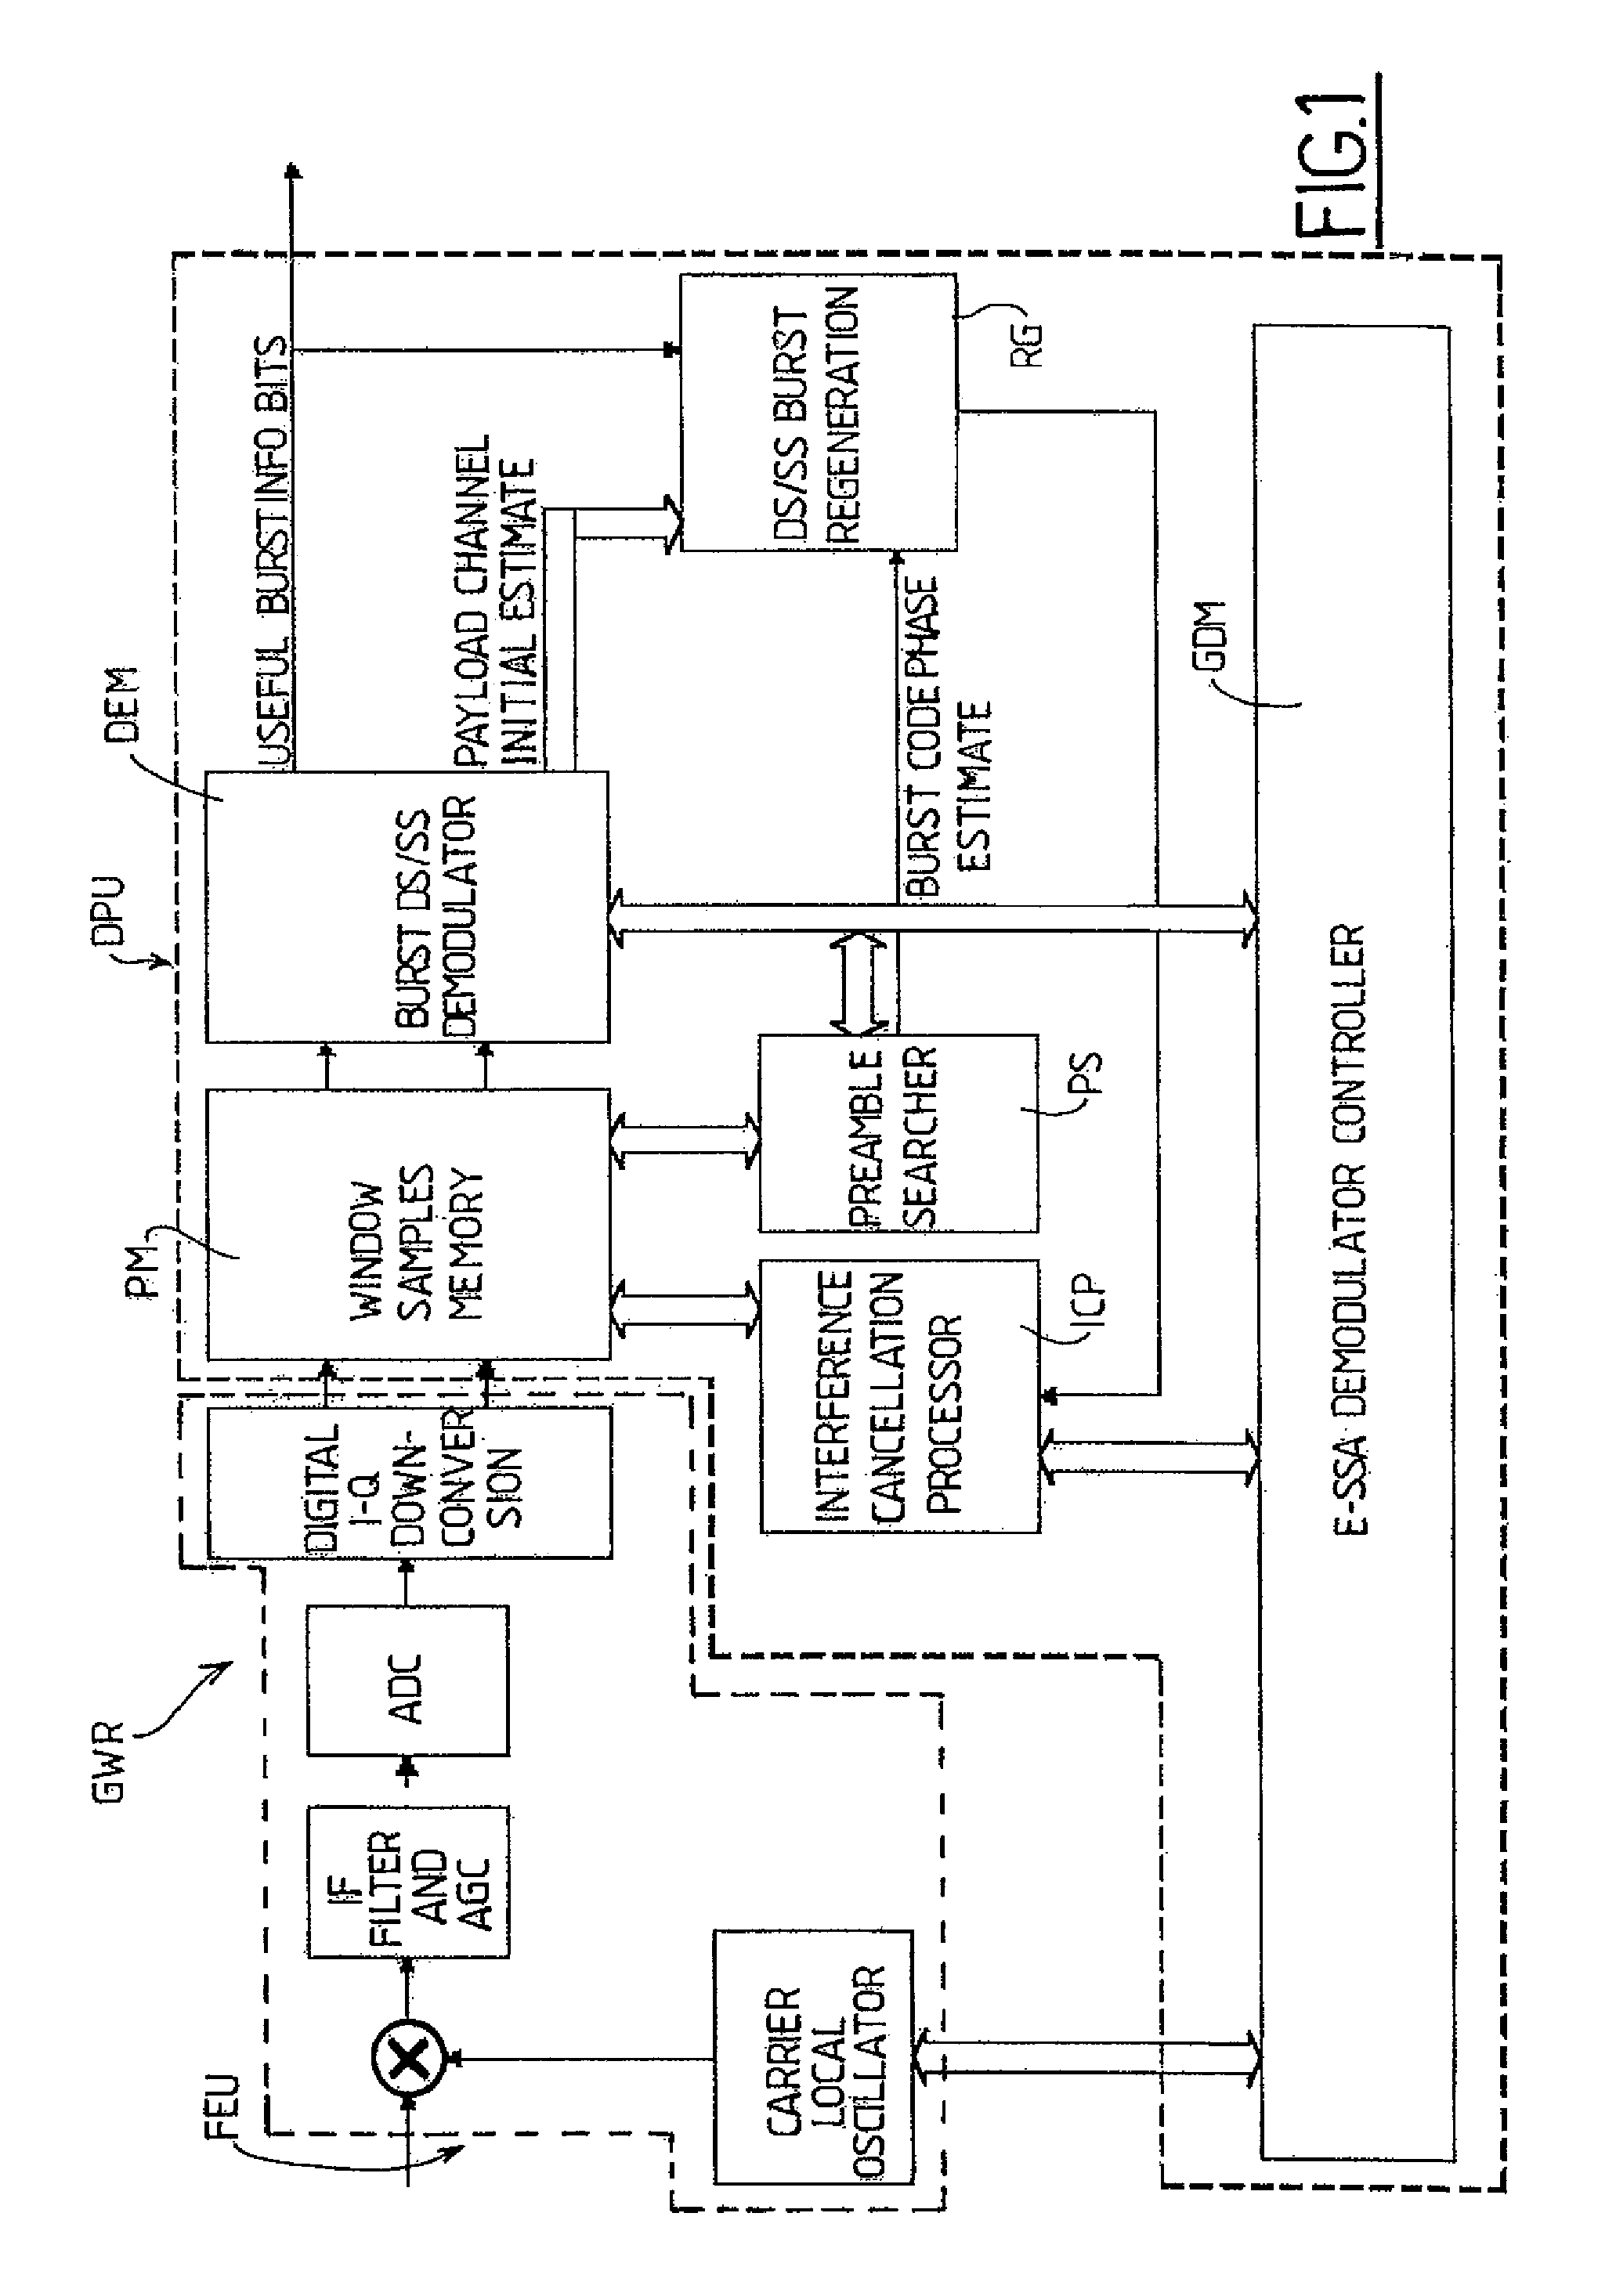 Methods, apparatuses and system for asynchronous spread-spectrum communication